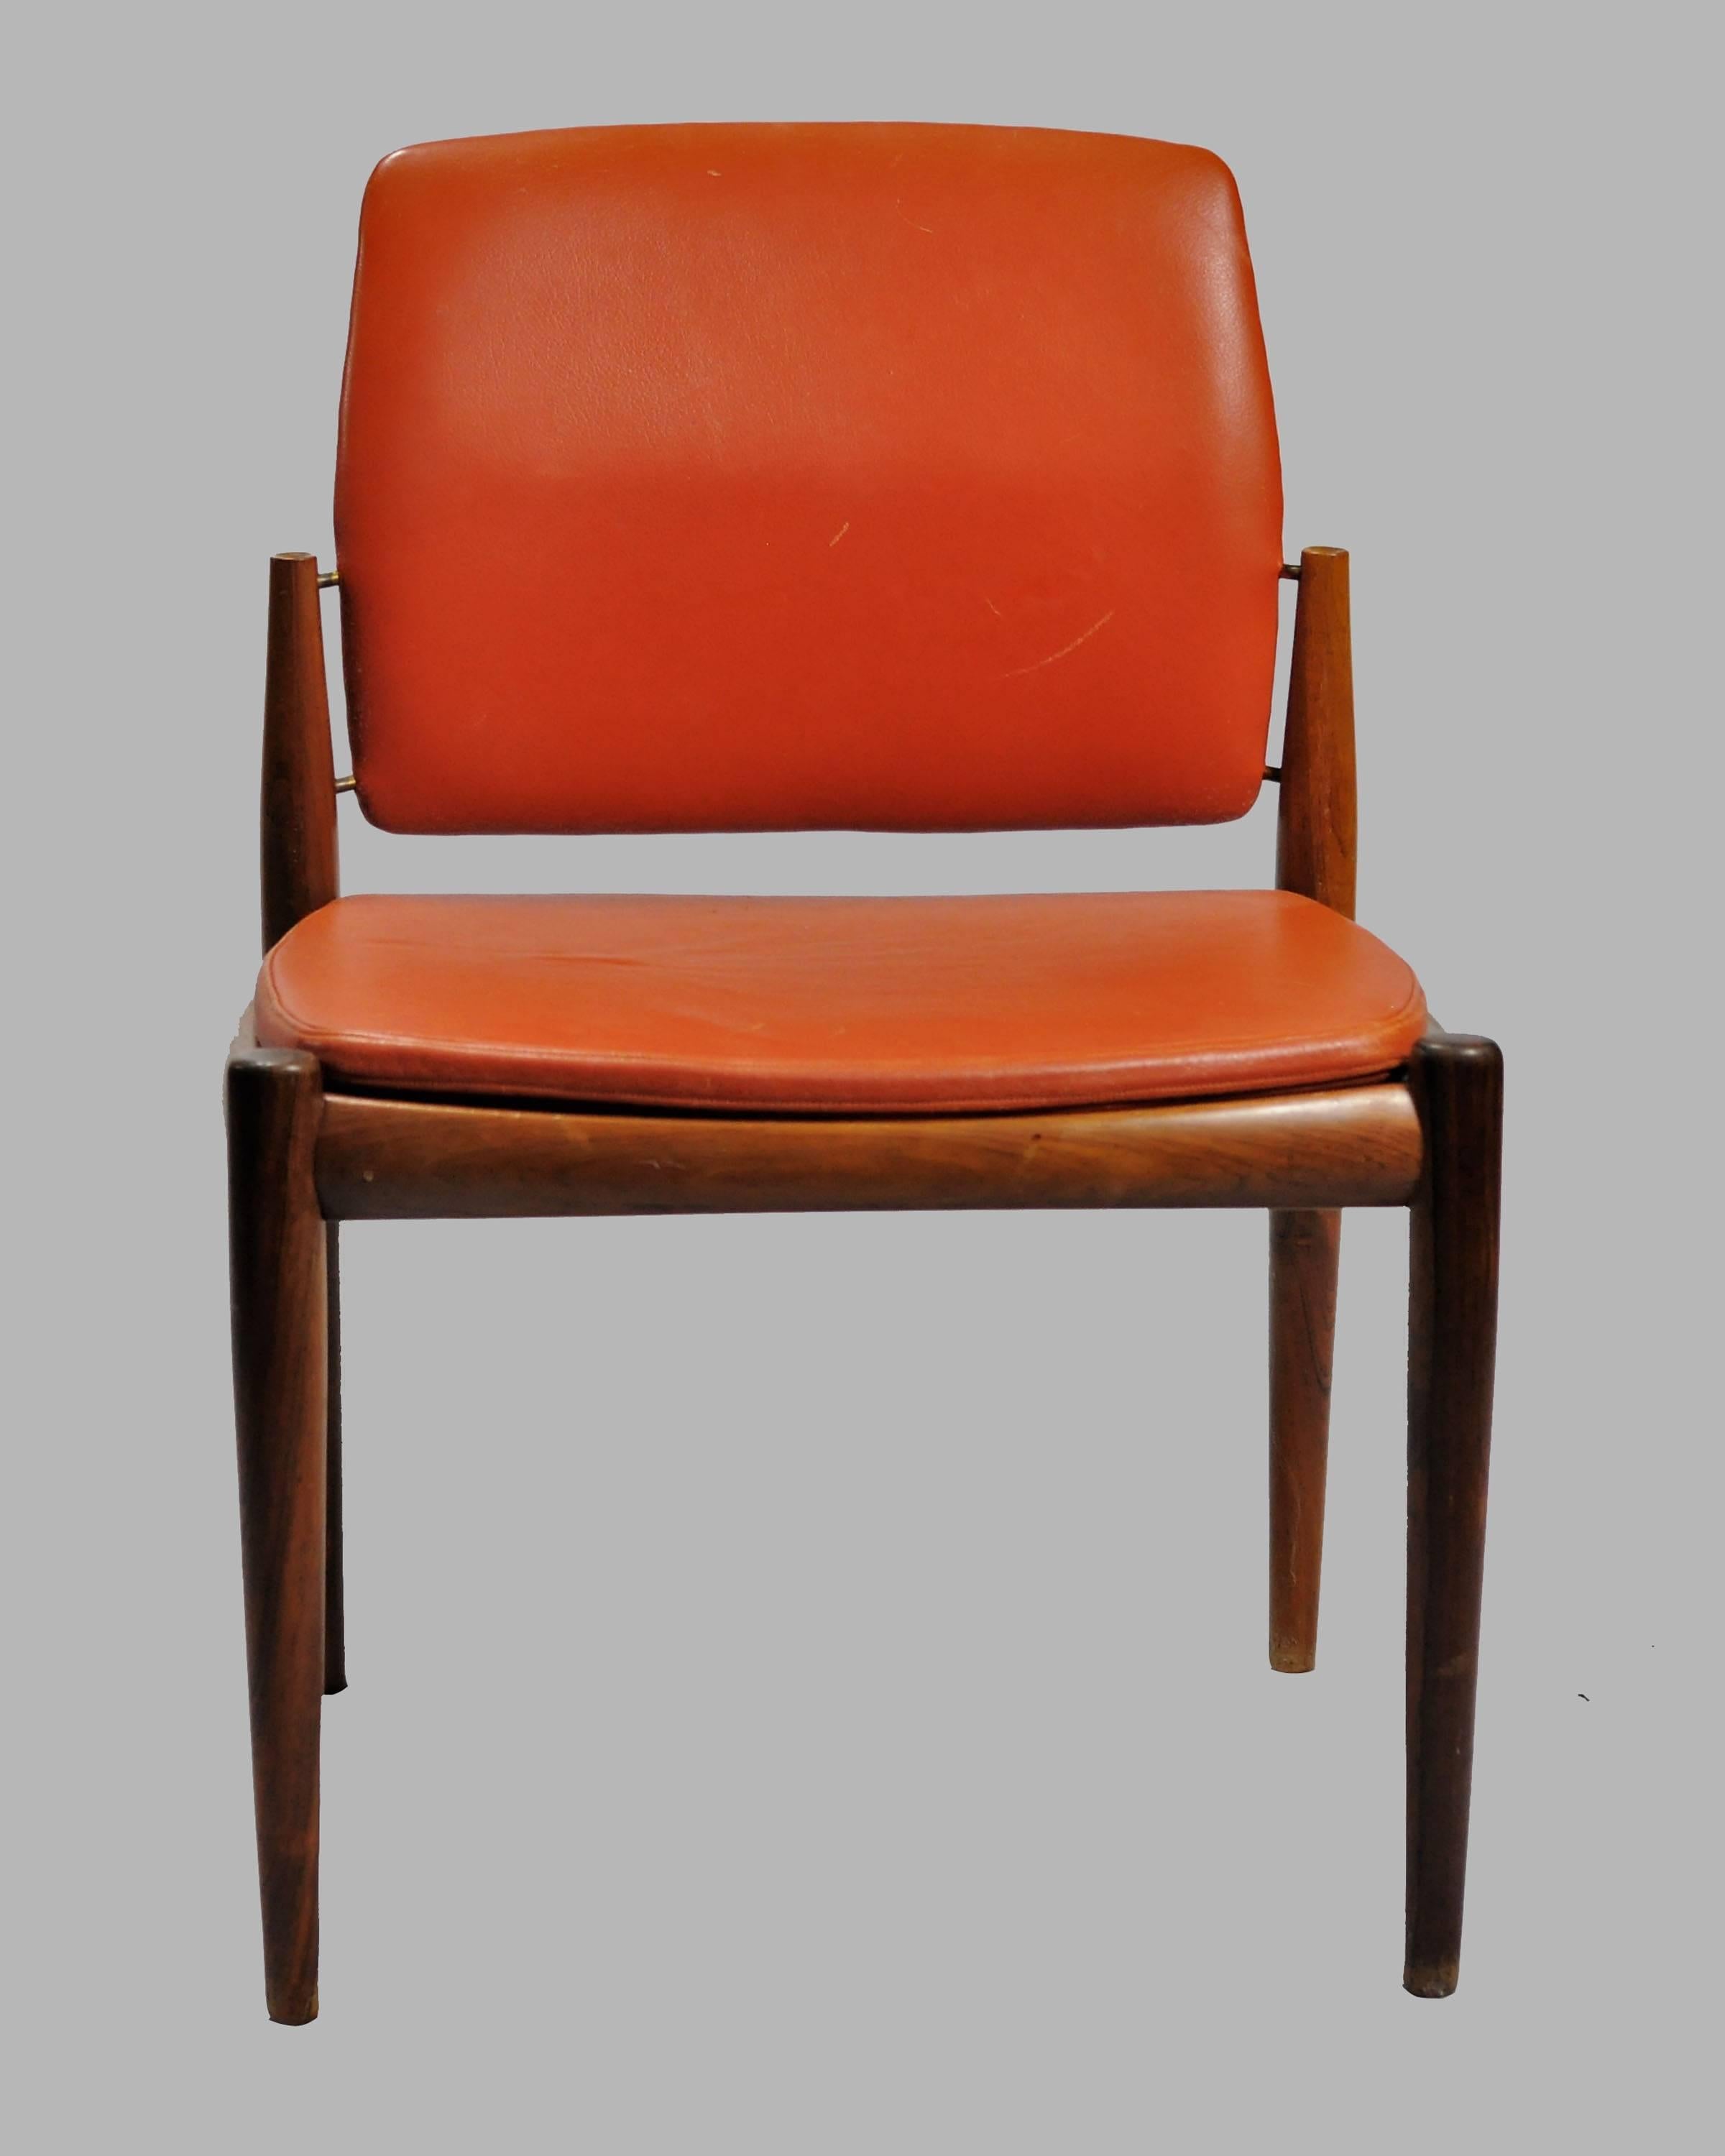 Rare set of six very well designed and well crafted dining chairs made for executive use at the old Skanderborg city hall in the 1960s.

The chairs are in very good condition with only few signs of age and use.

We have a similar set of 12